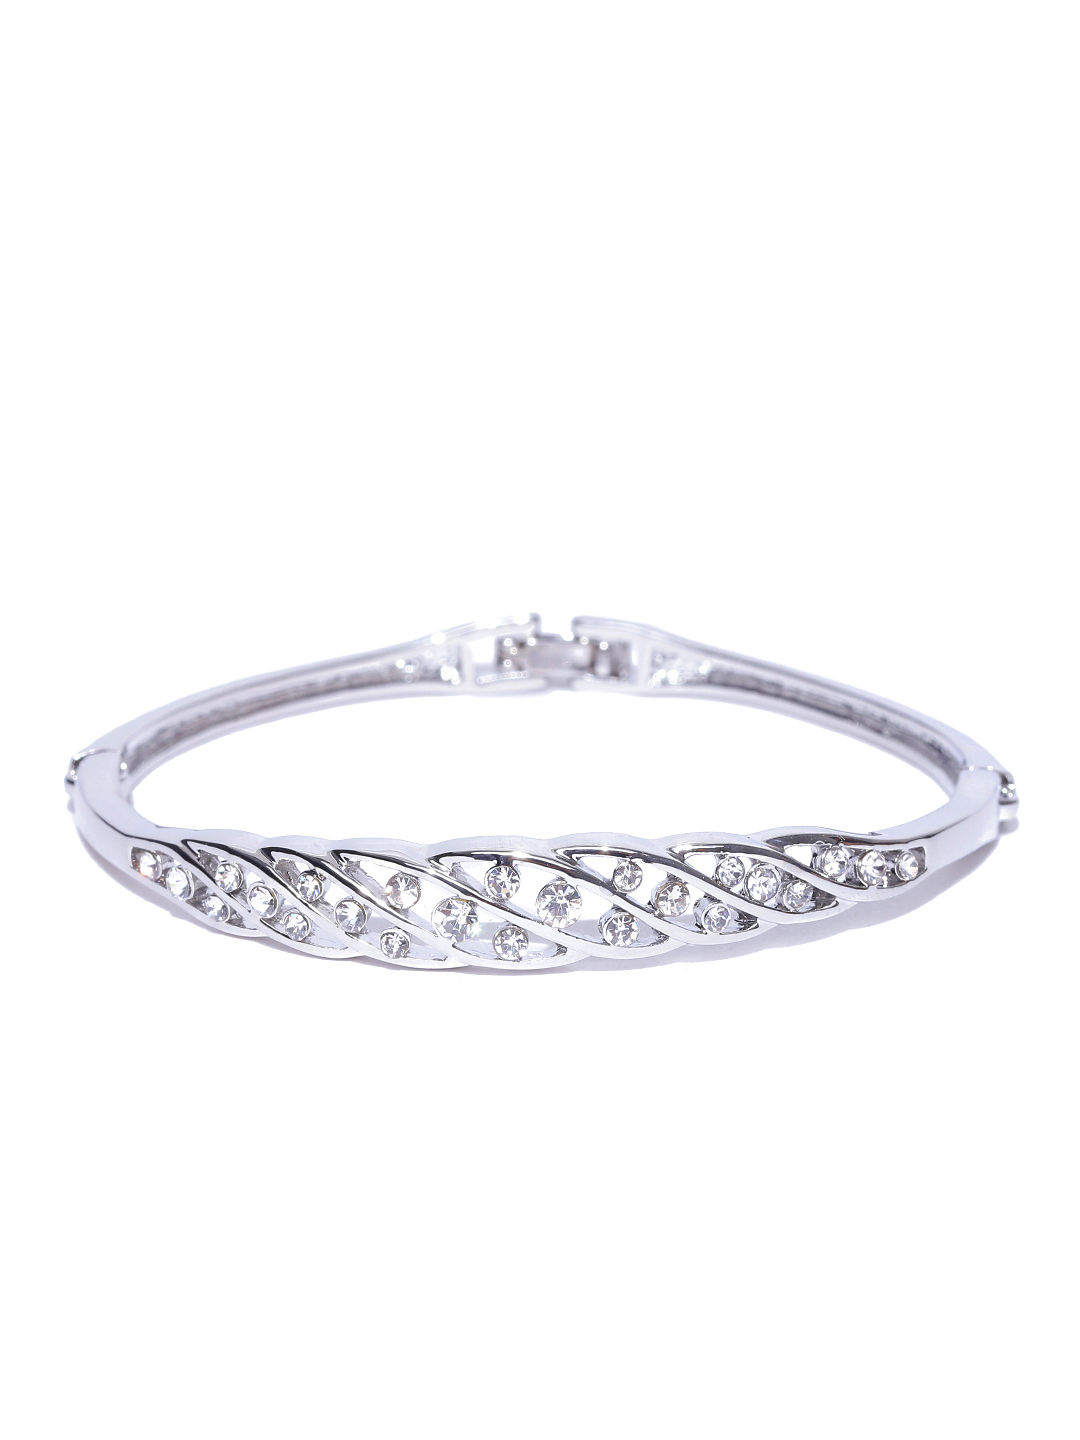 Buy Sterling Silver Platinum Plated Bangle Bracelet With Engraved Online in  India  Etsy